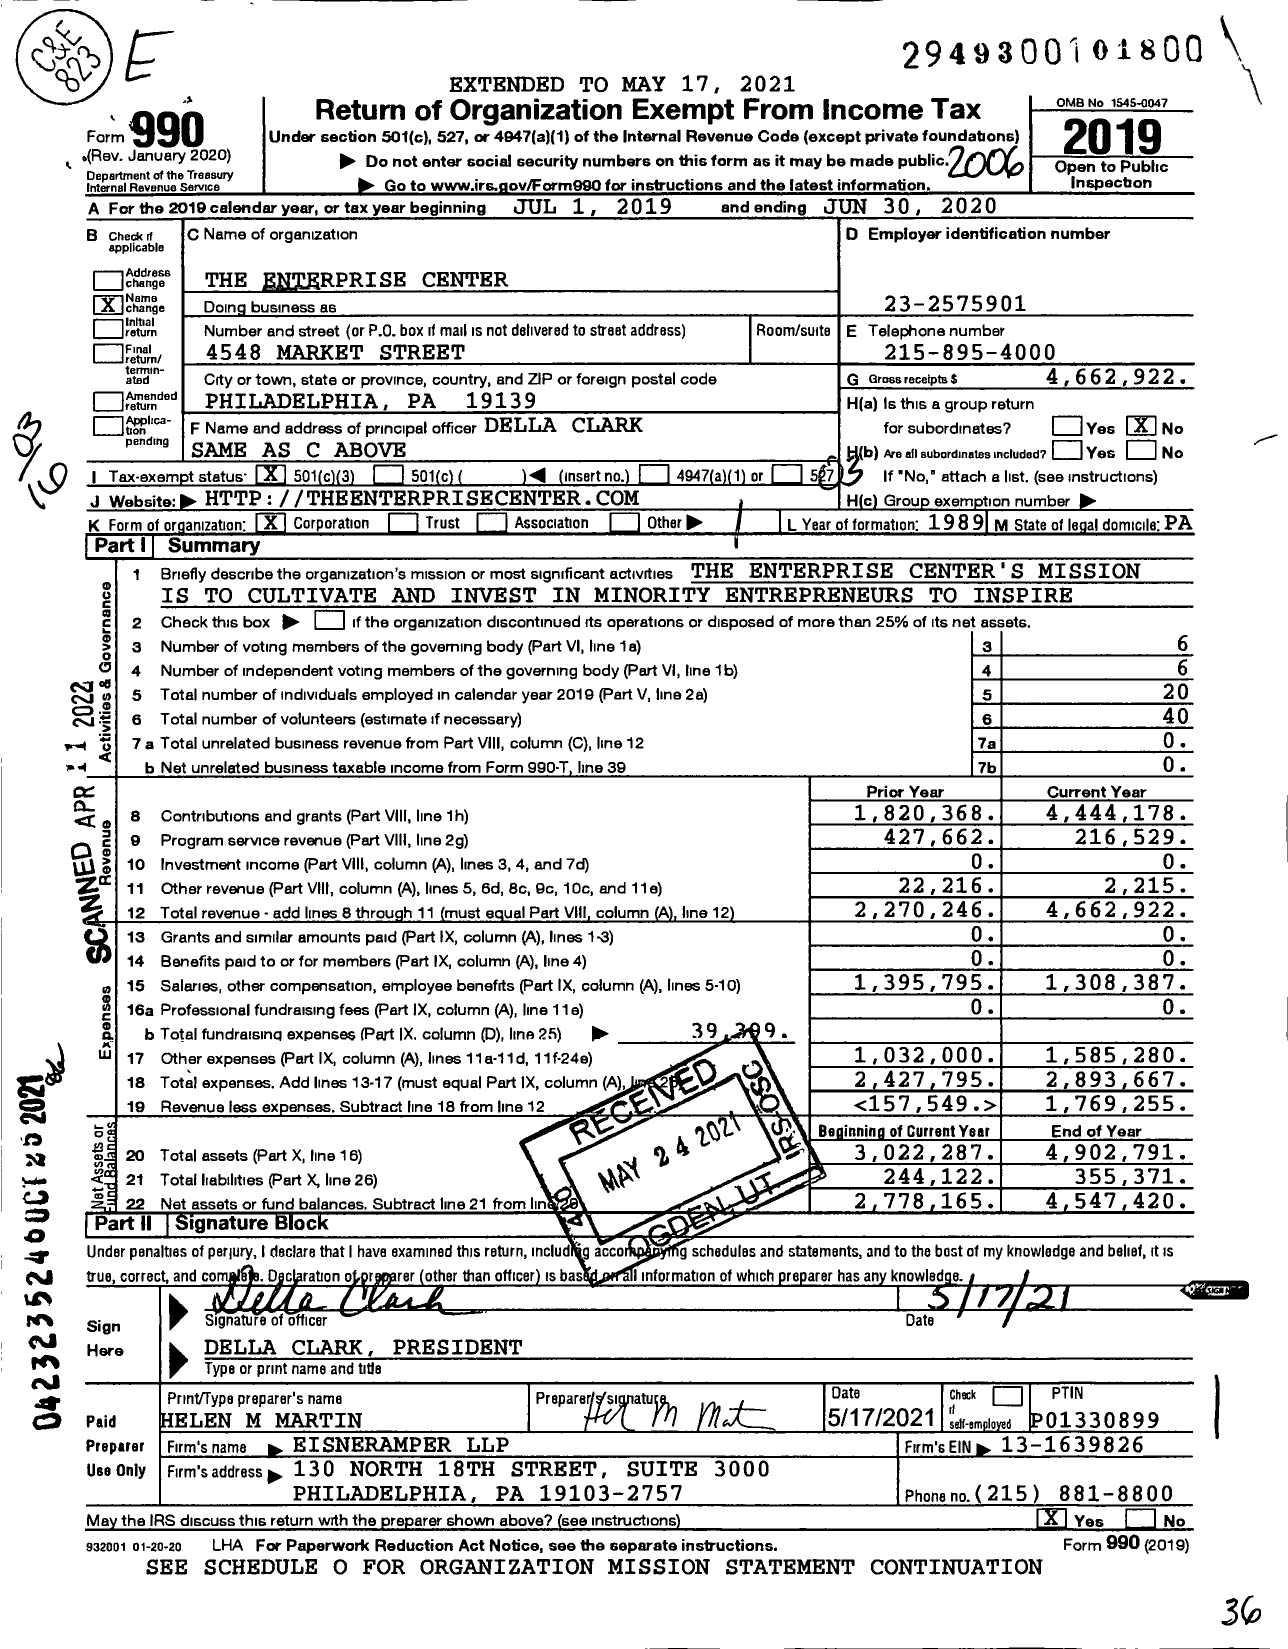 Image of first page of 2019 Form 990 for The Enterprise Center (TEC)